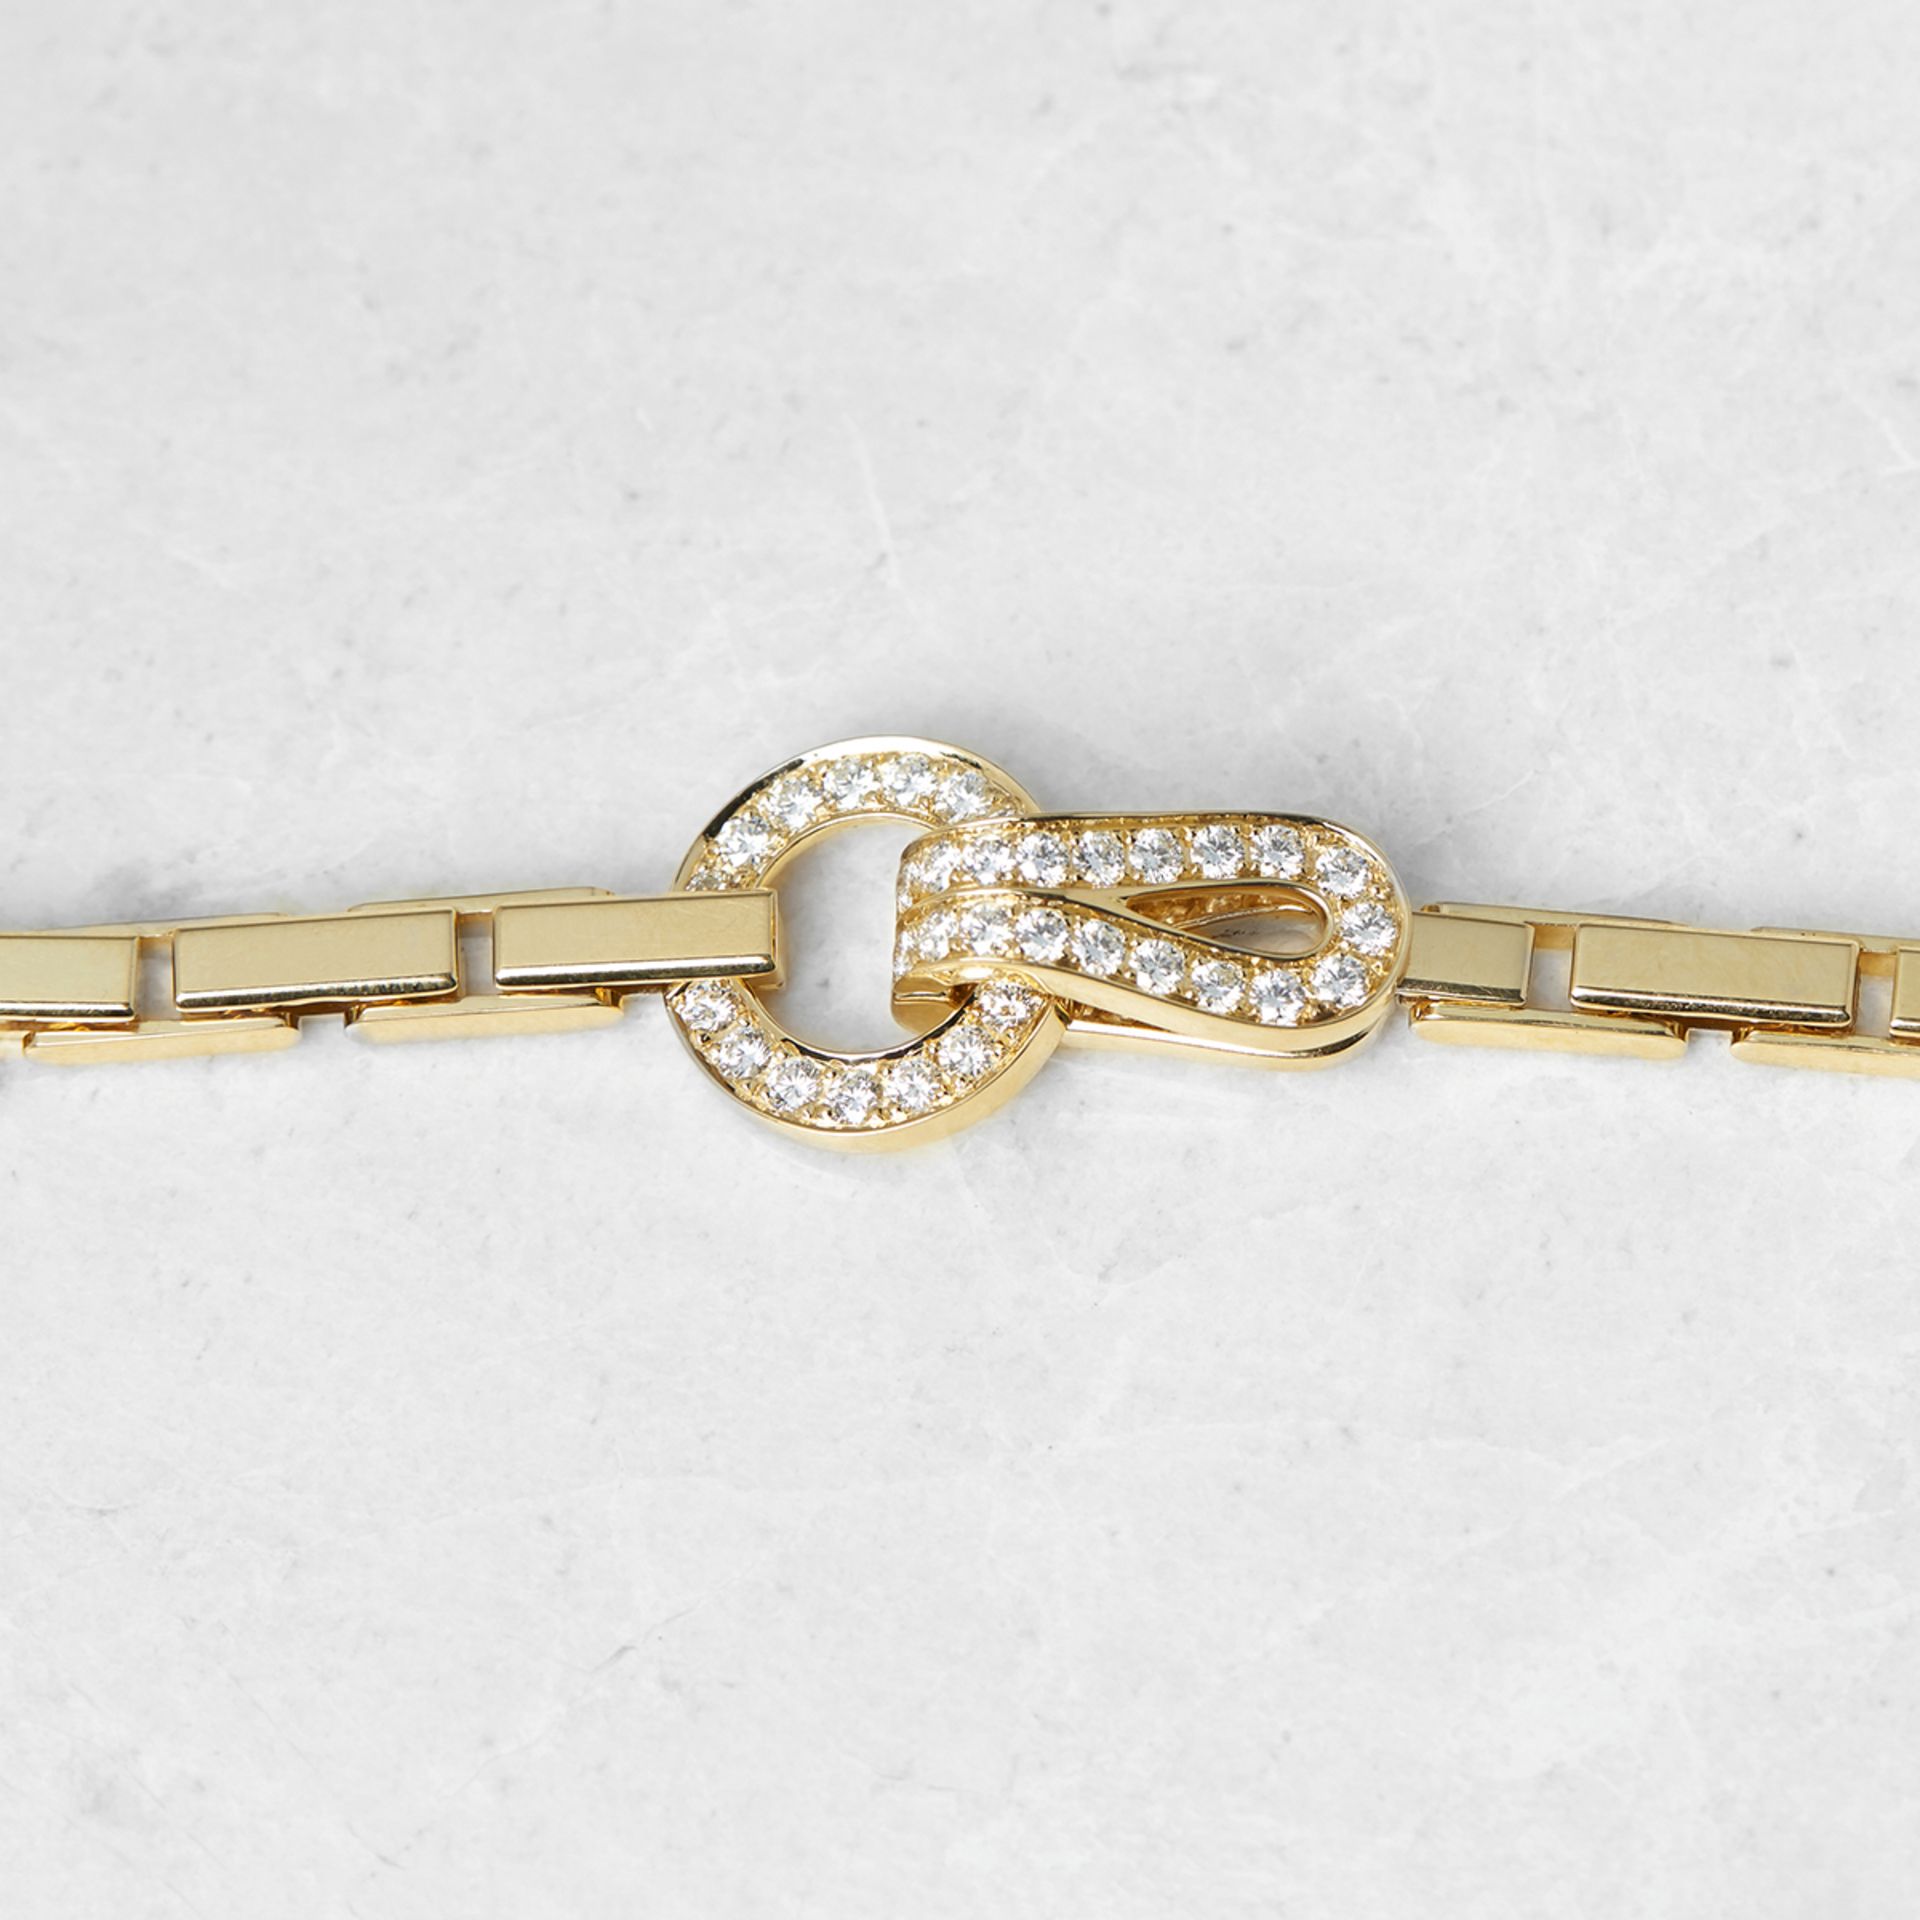 Cartier, 18k Yellow Gold Diamond Agrafe Necklace - Image 2 of 5